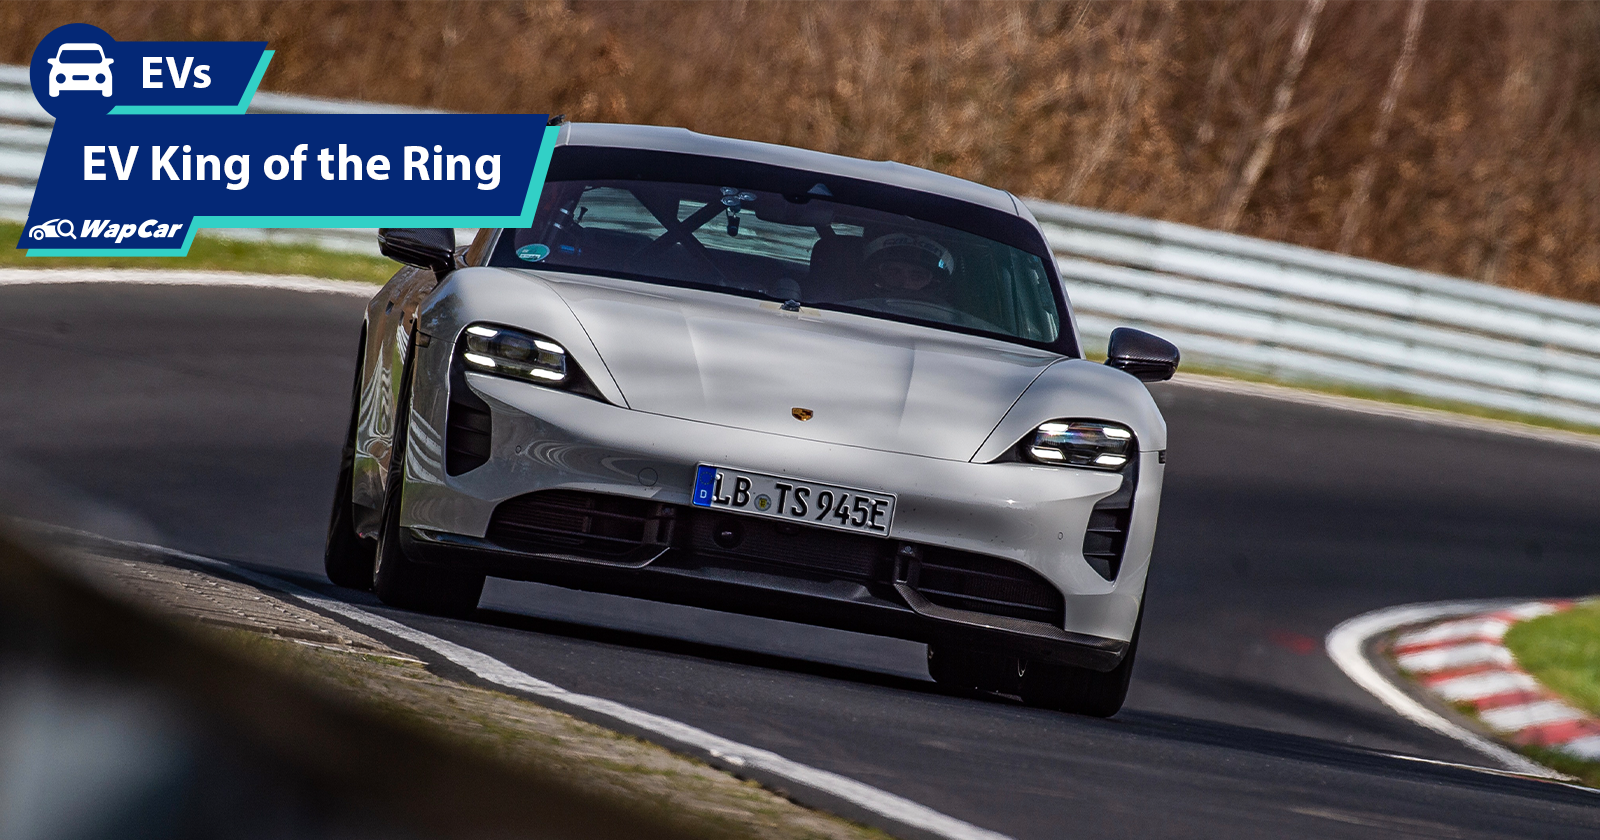 Porsche Taycan takes back EV throne on the Nurburgring from Tesla Model S